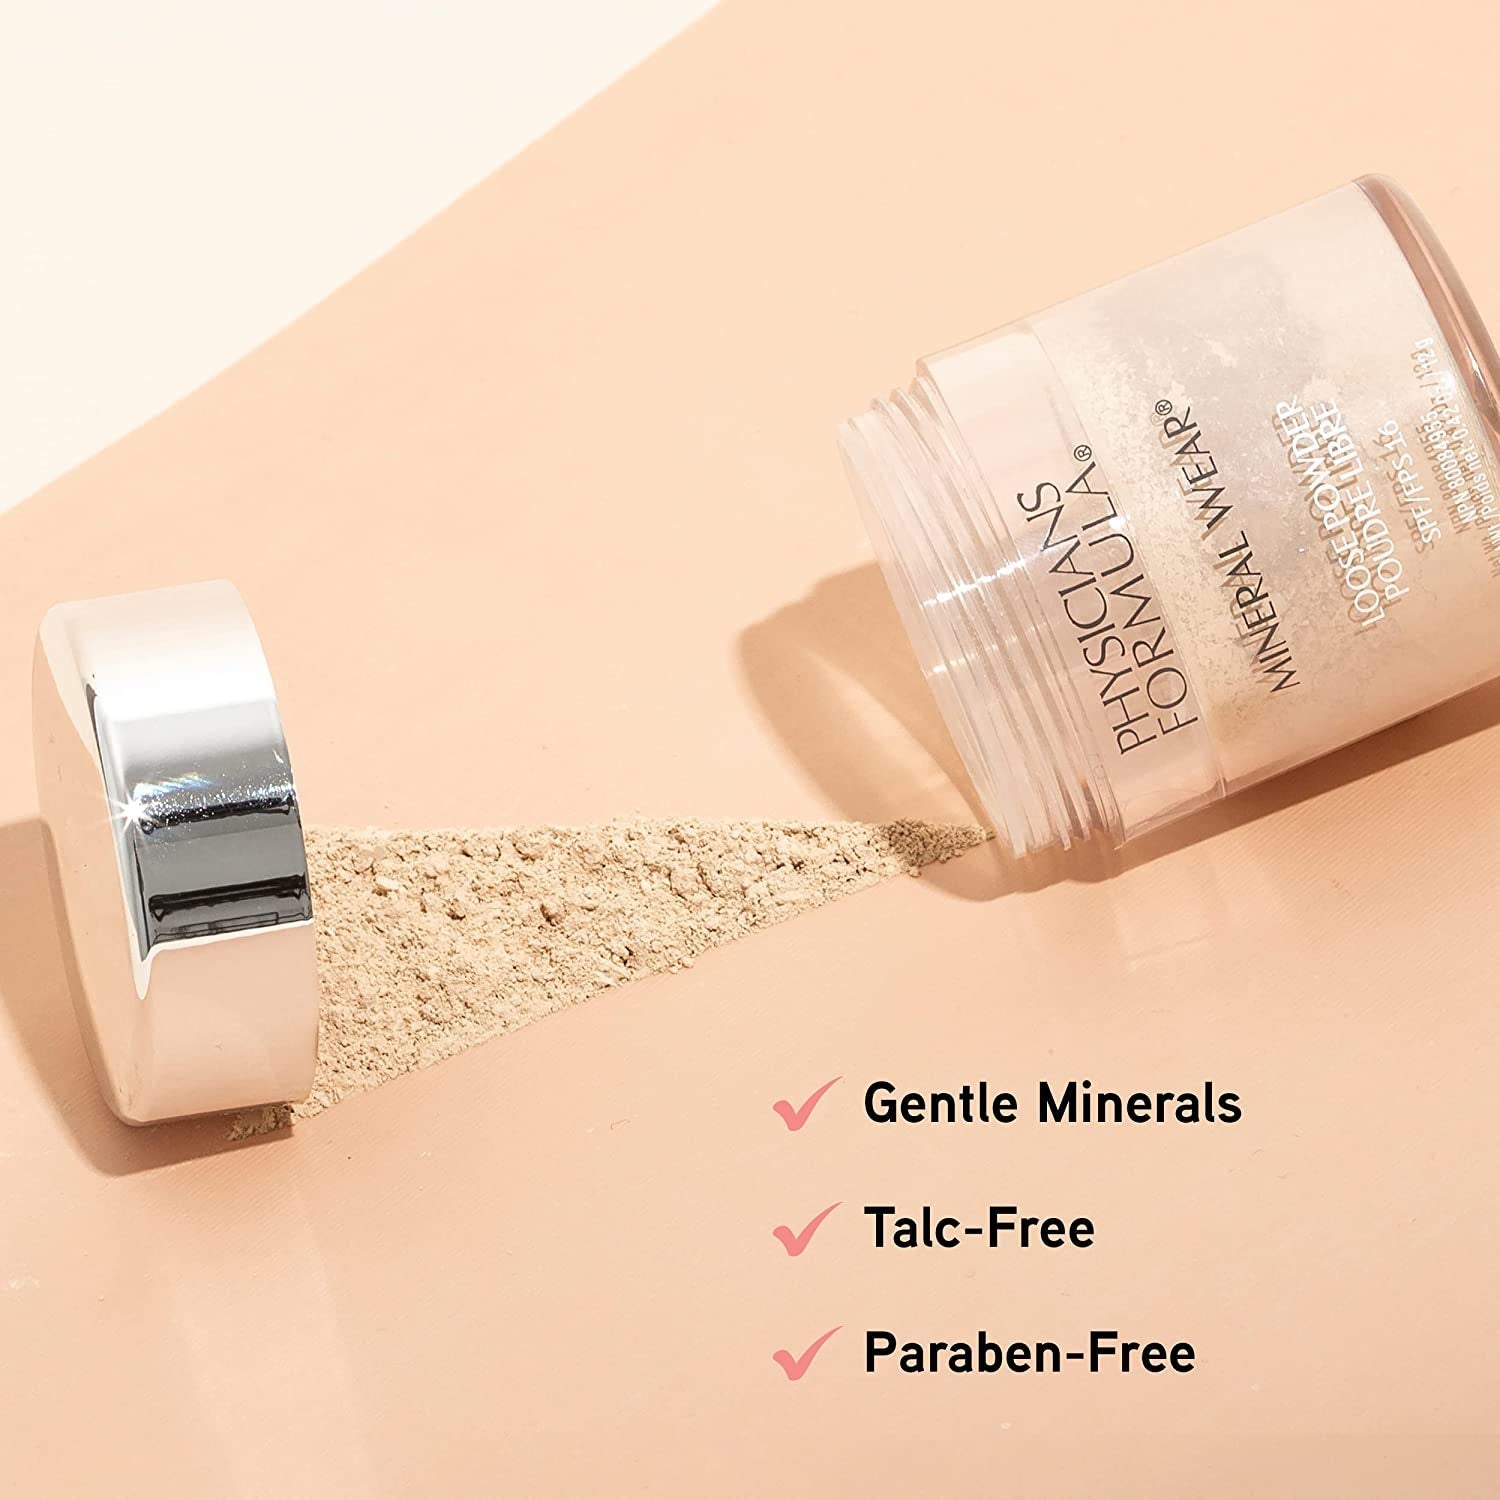 Mineral Wear Talc-Free Loose Powder Creamy Natural, Dermatologist Tested, Clinically Tested - HealthFulBeautyLife